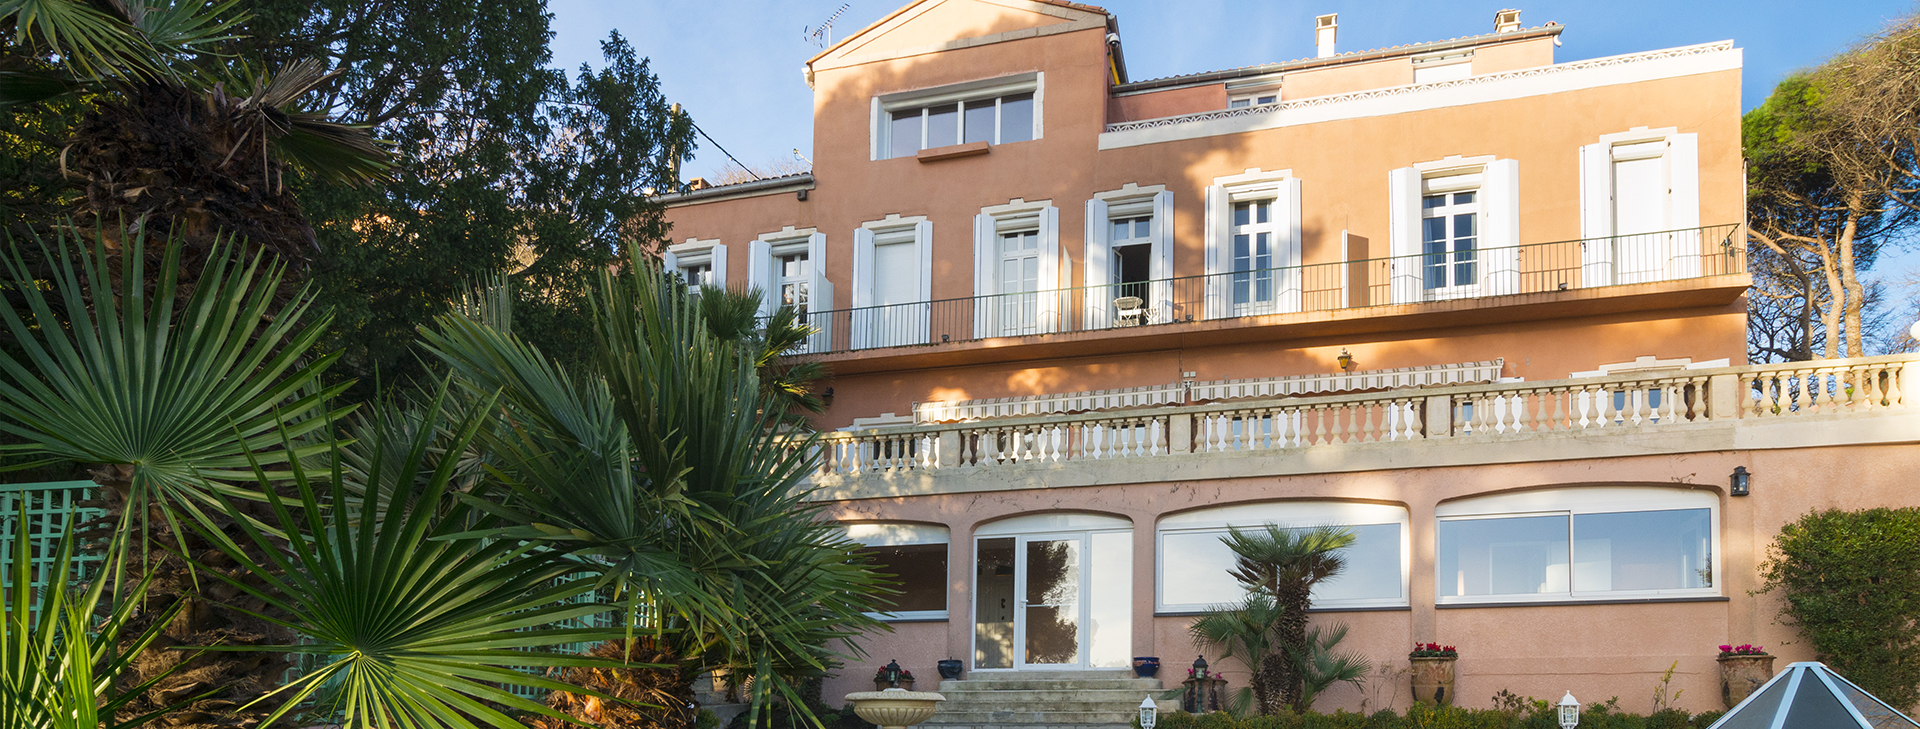 Logis du Mas, bed and breakfast in Sète